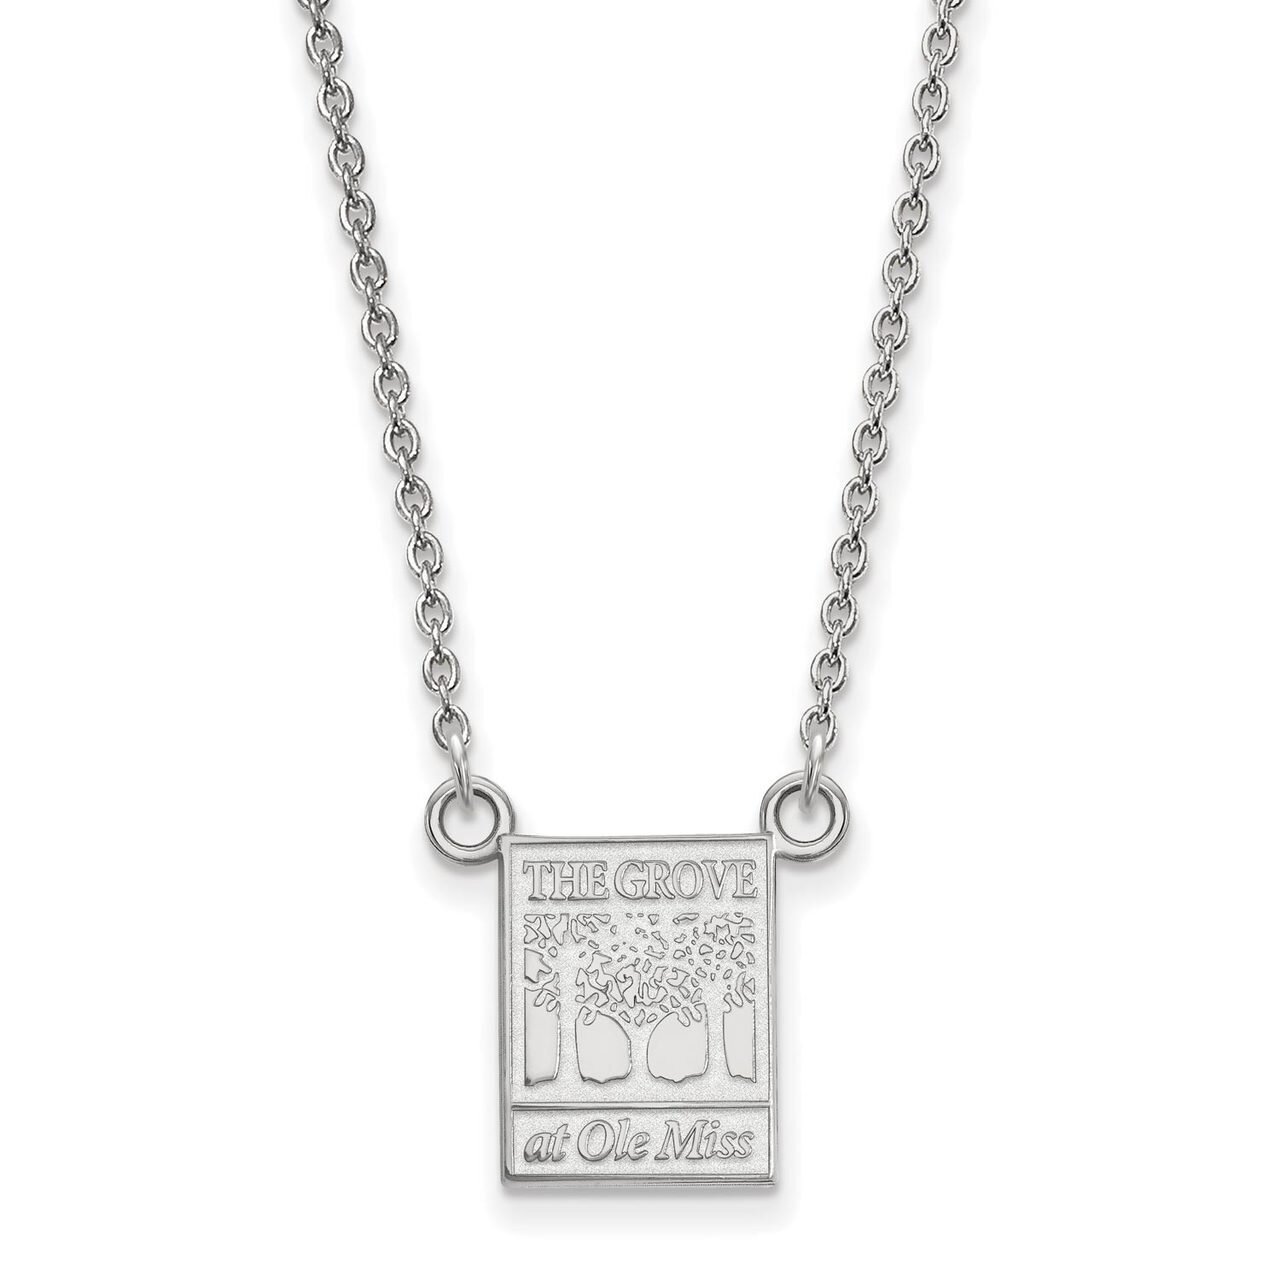 University of Mississippi Small Pendant with Chain Necklace 14k White Gold 4W064UMS-18